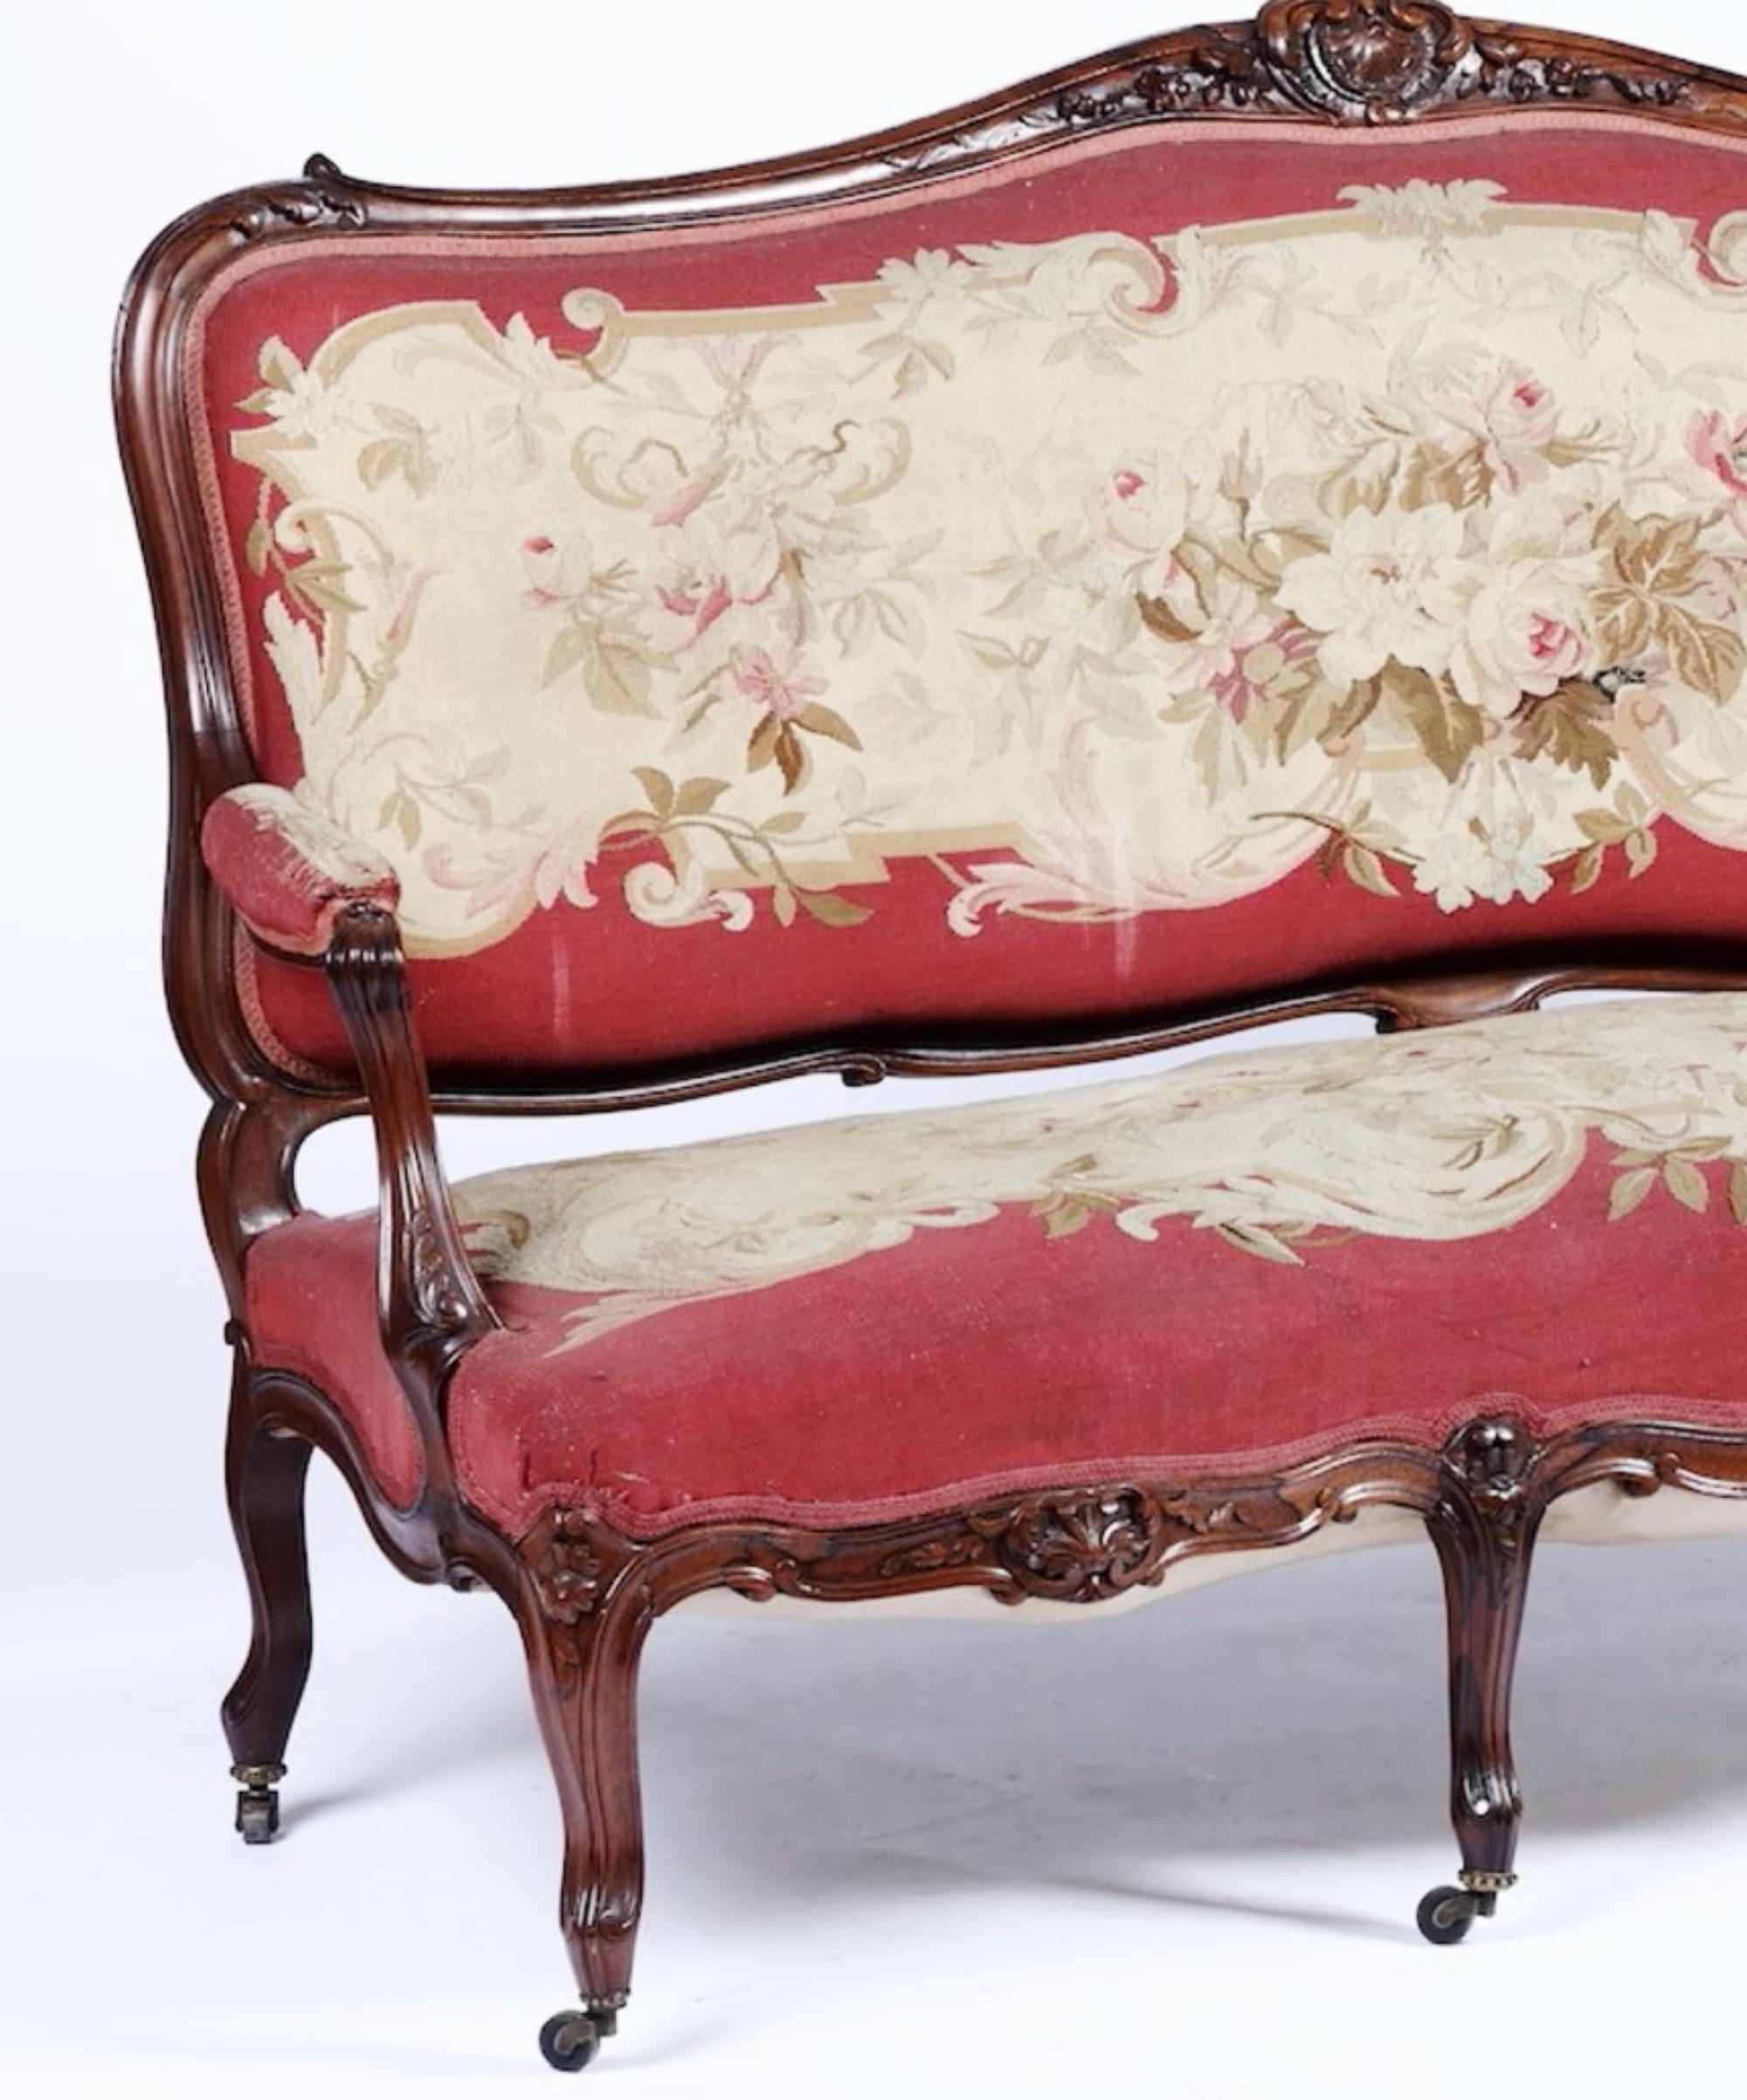 French Canape Louis Philippe 19th Century Upholstered and Covered with Aubusson Fabric